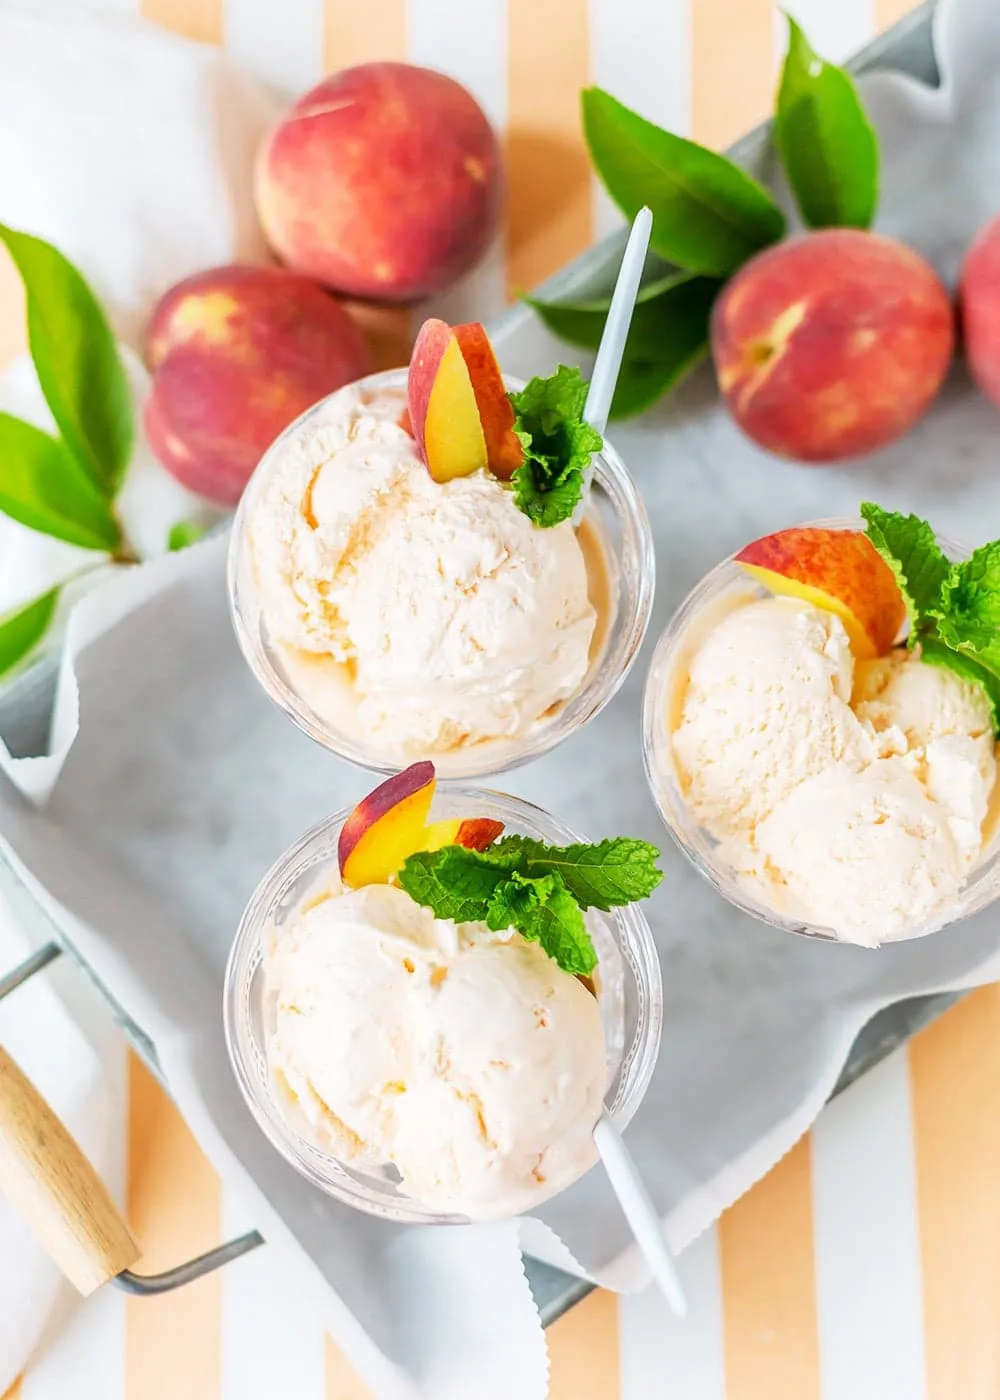 Three bowls of peach ice cream with fresh peach slices and mint garnish in a tray.